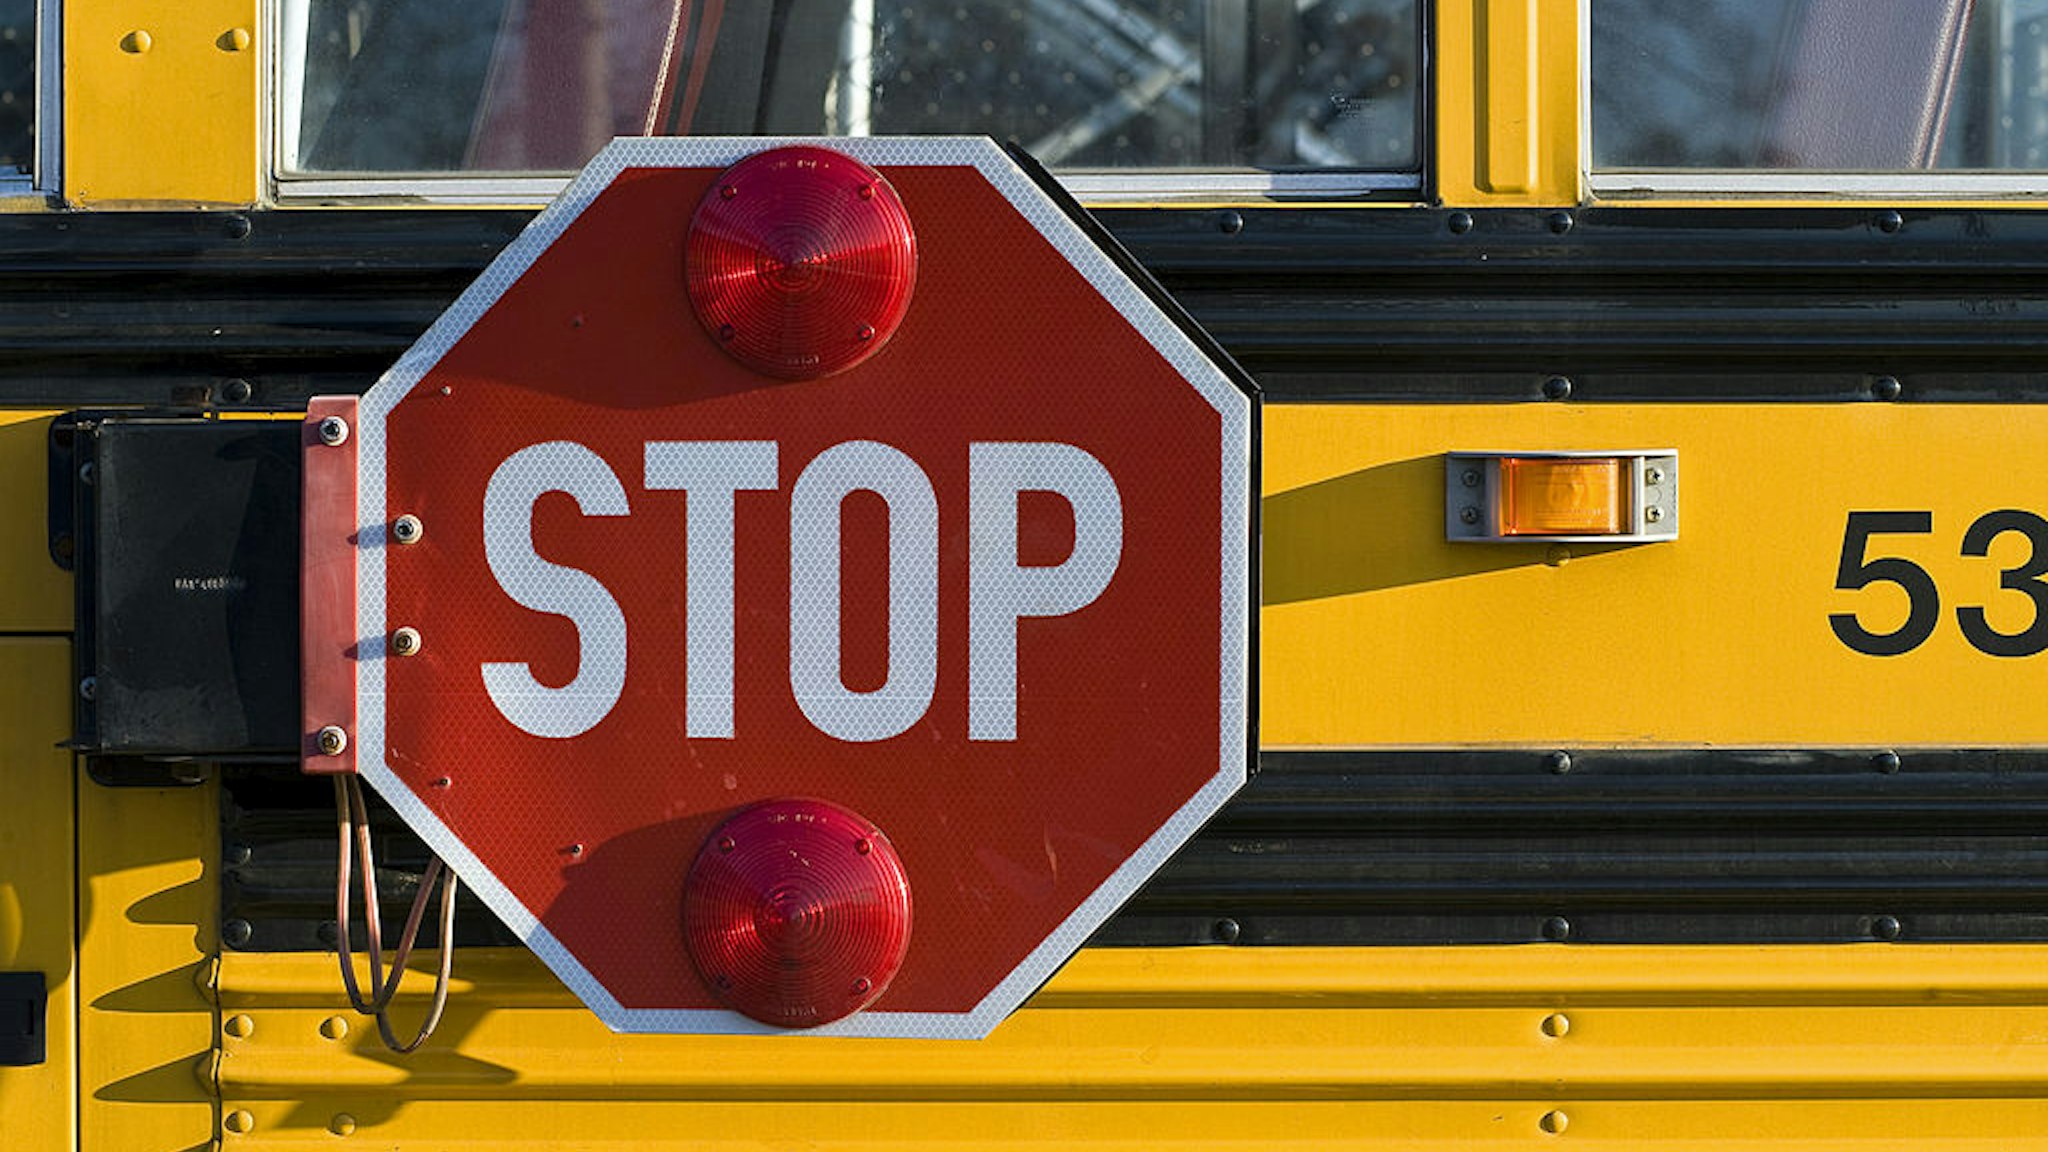 UNITED STATES - 2008/10/27: School bus with retracting safety stop sign. (Photo by John Greim/LightRocket via Getty Images)